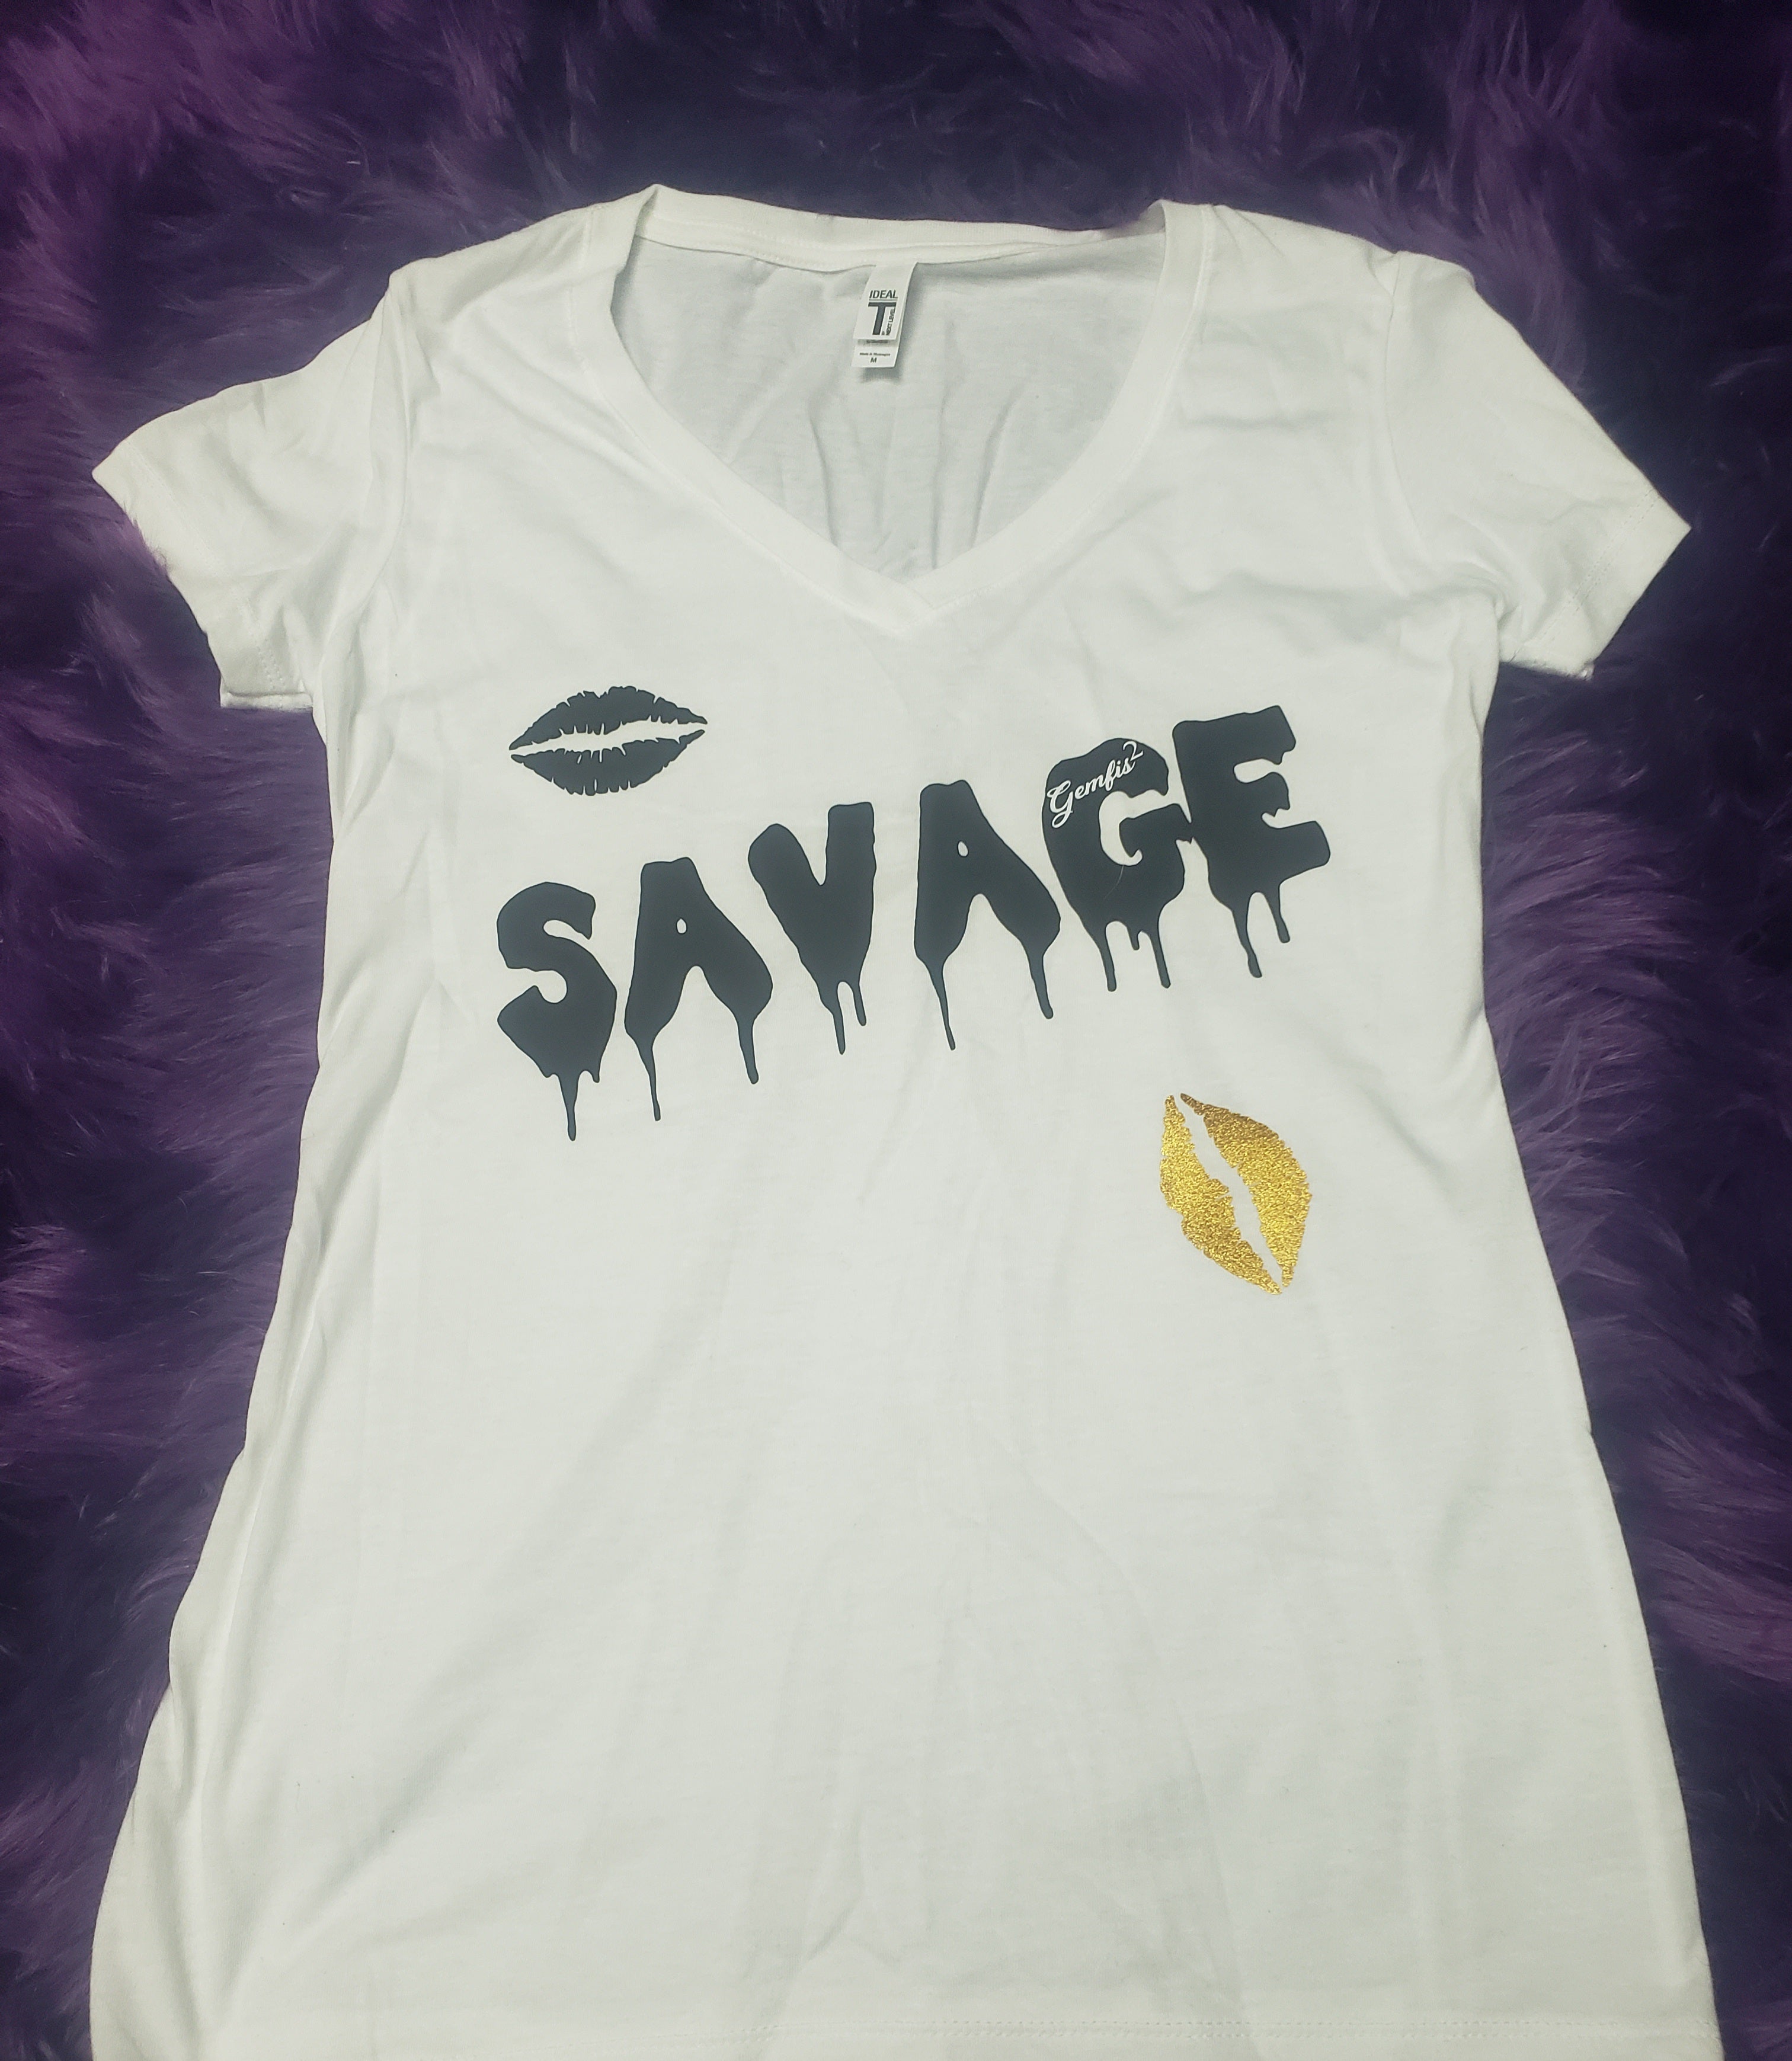 Savage Fitted Shirt